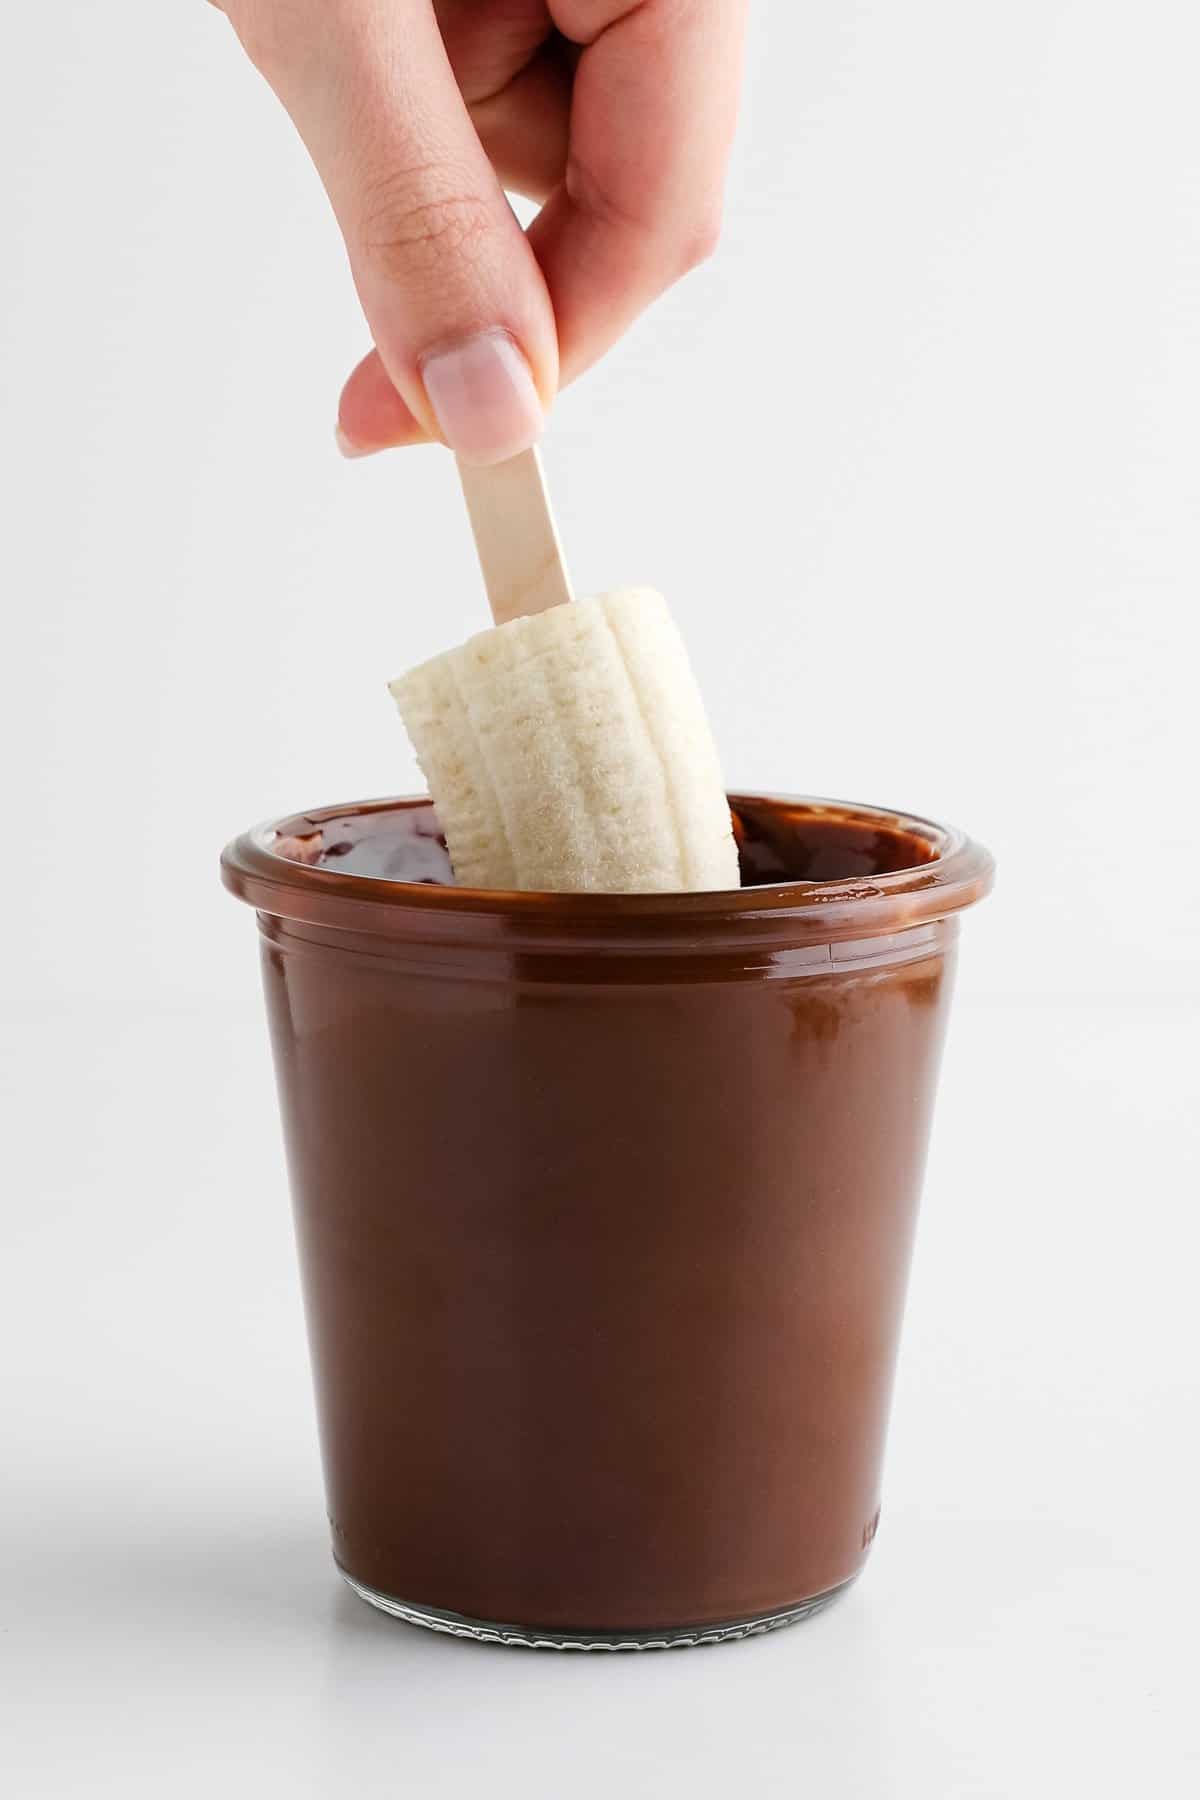 dipped a frozen banana pop into melted chocolate inside a glass weck jar